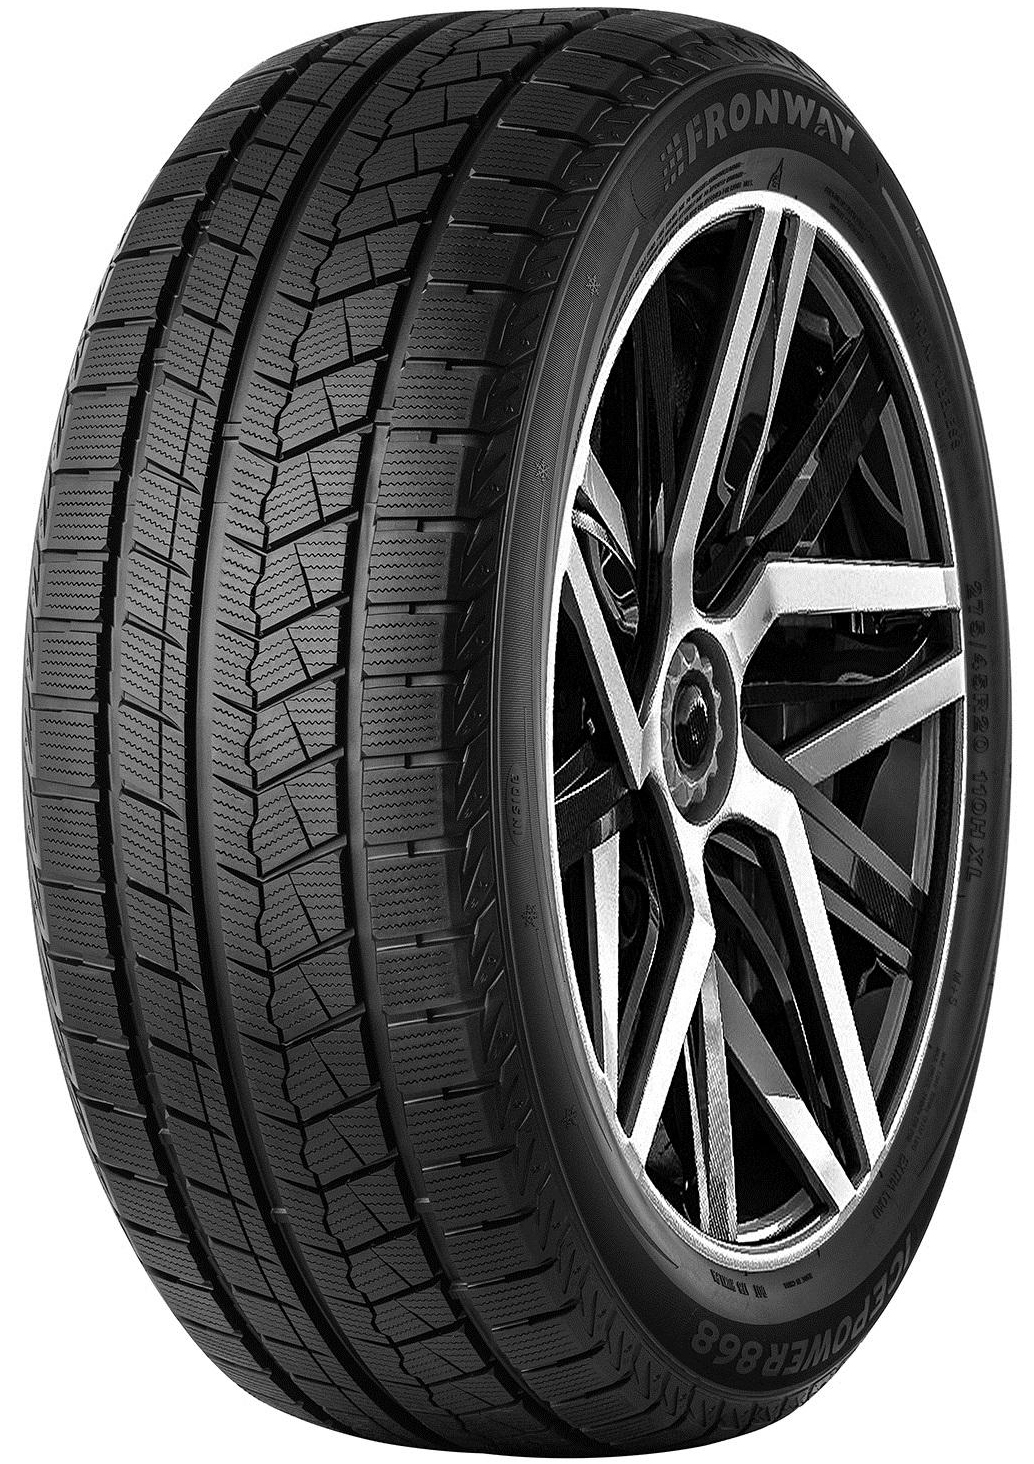    Fronway Icepower 868 245/70 R16 